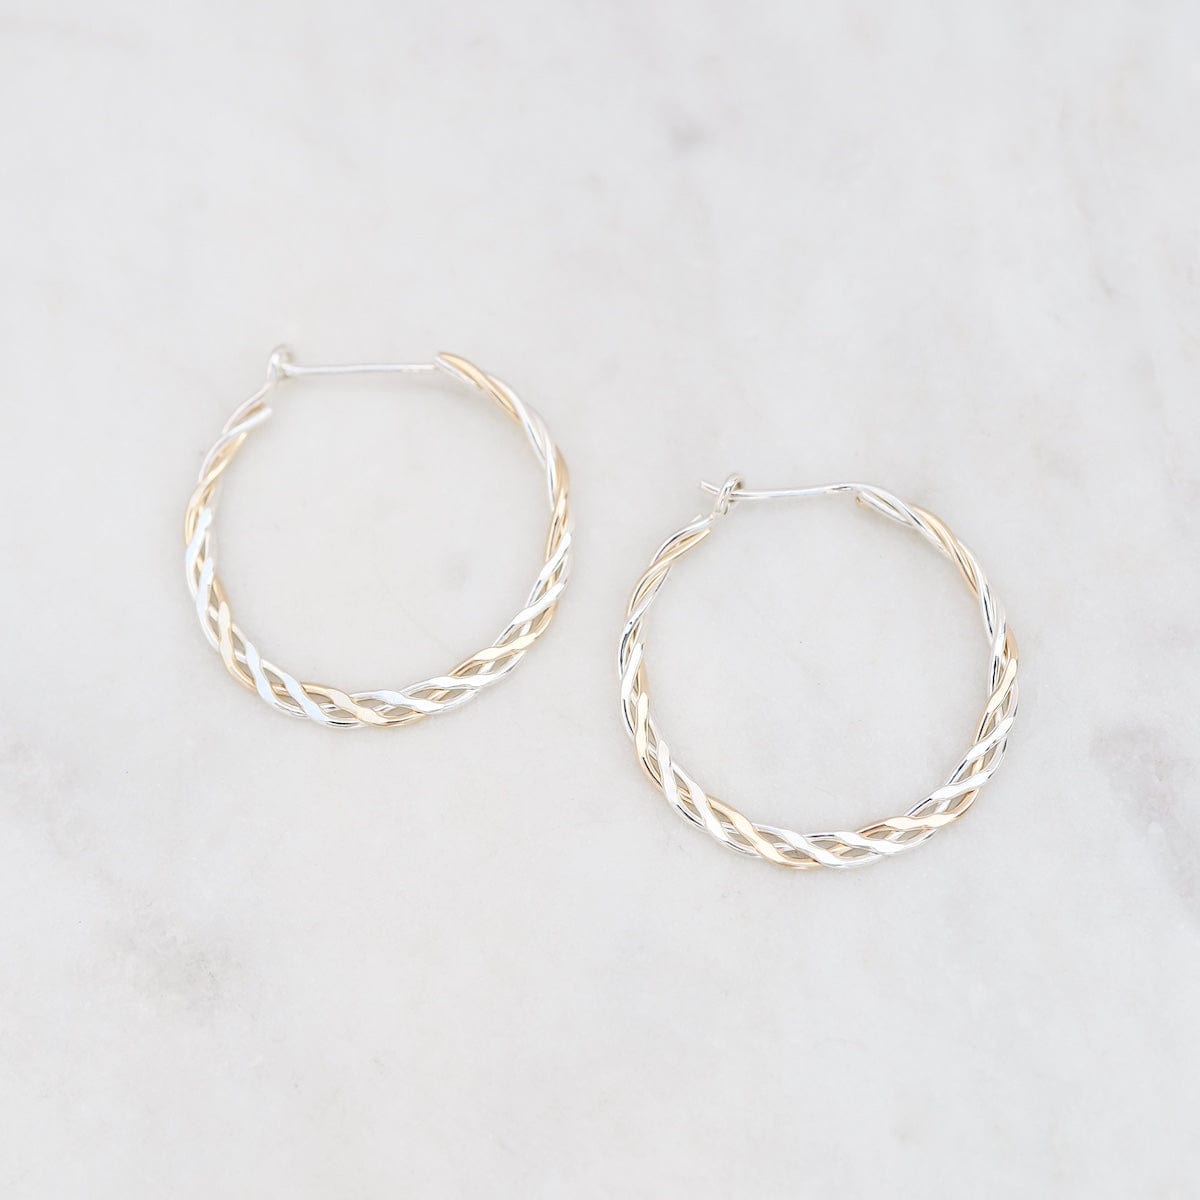 EAR-GF Mixed Sterling Silver & Gold Filled Braided Hoops - Small